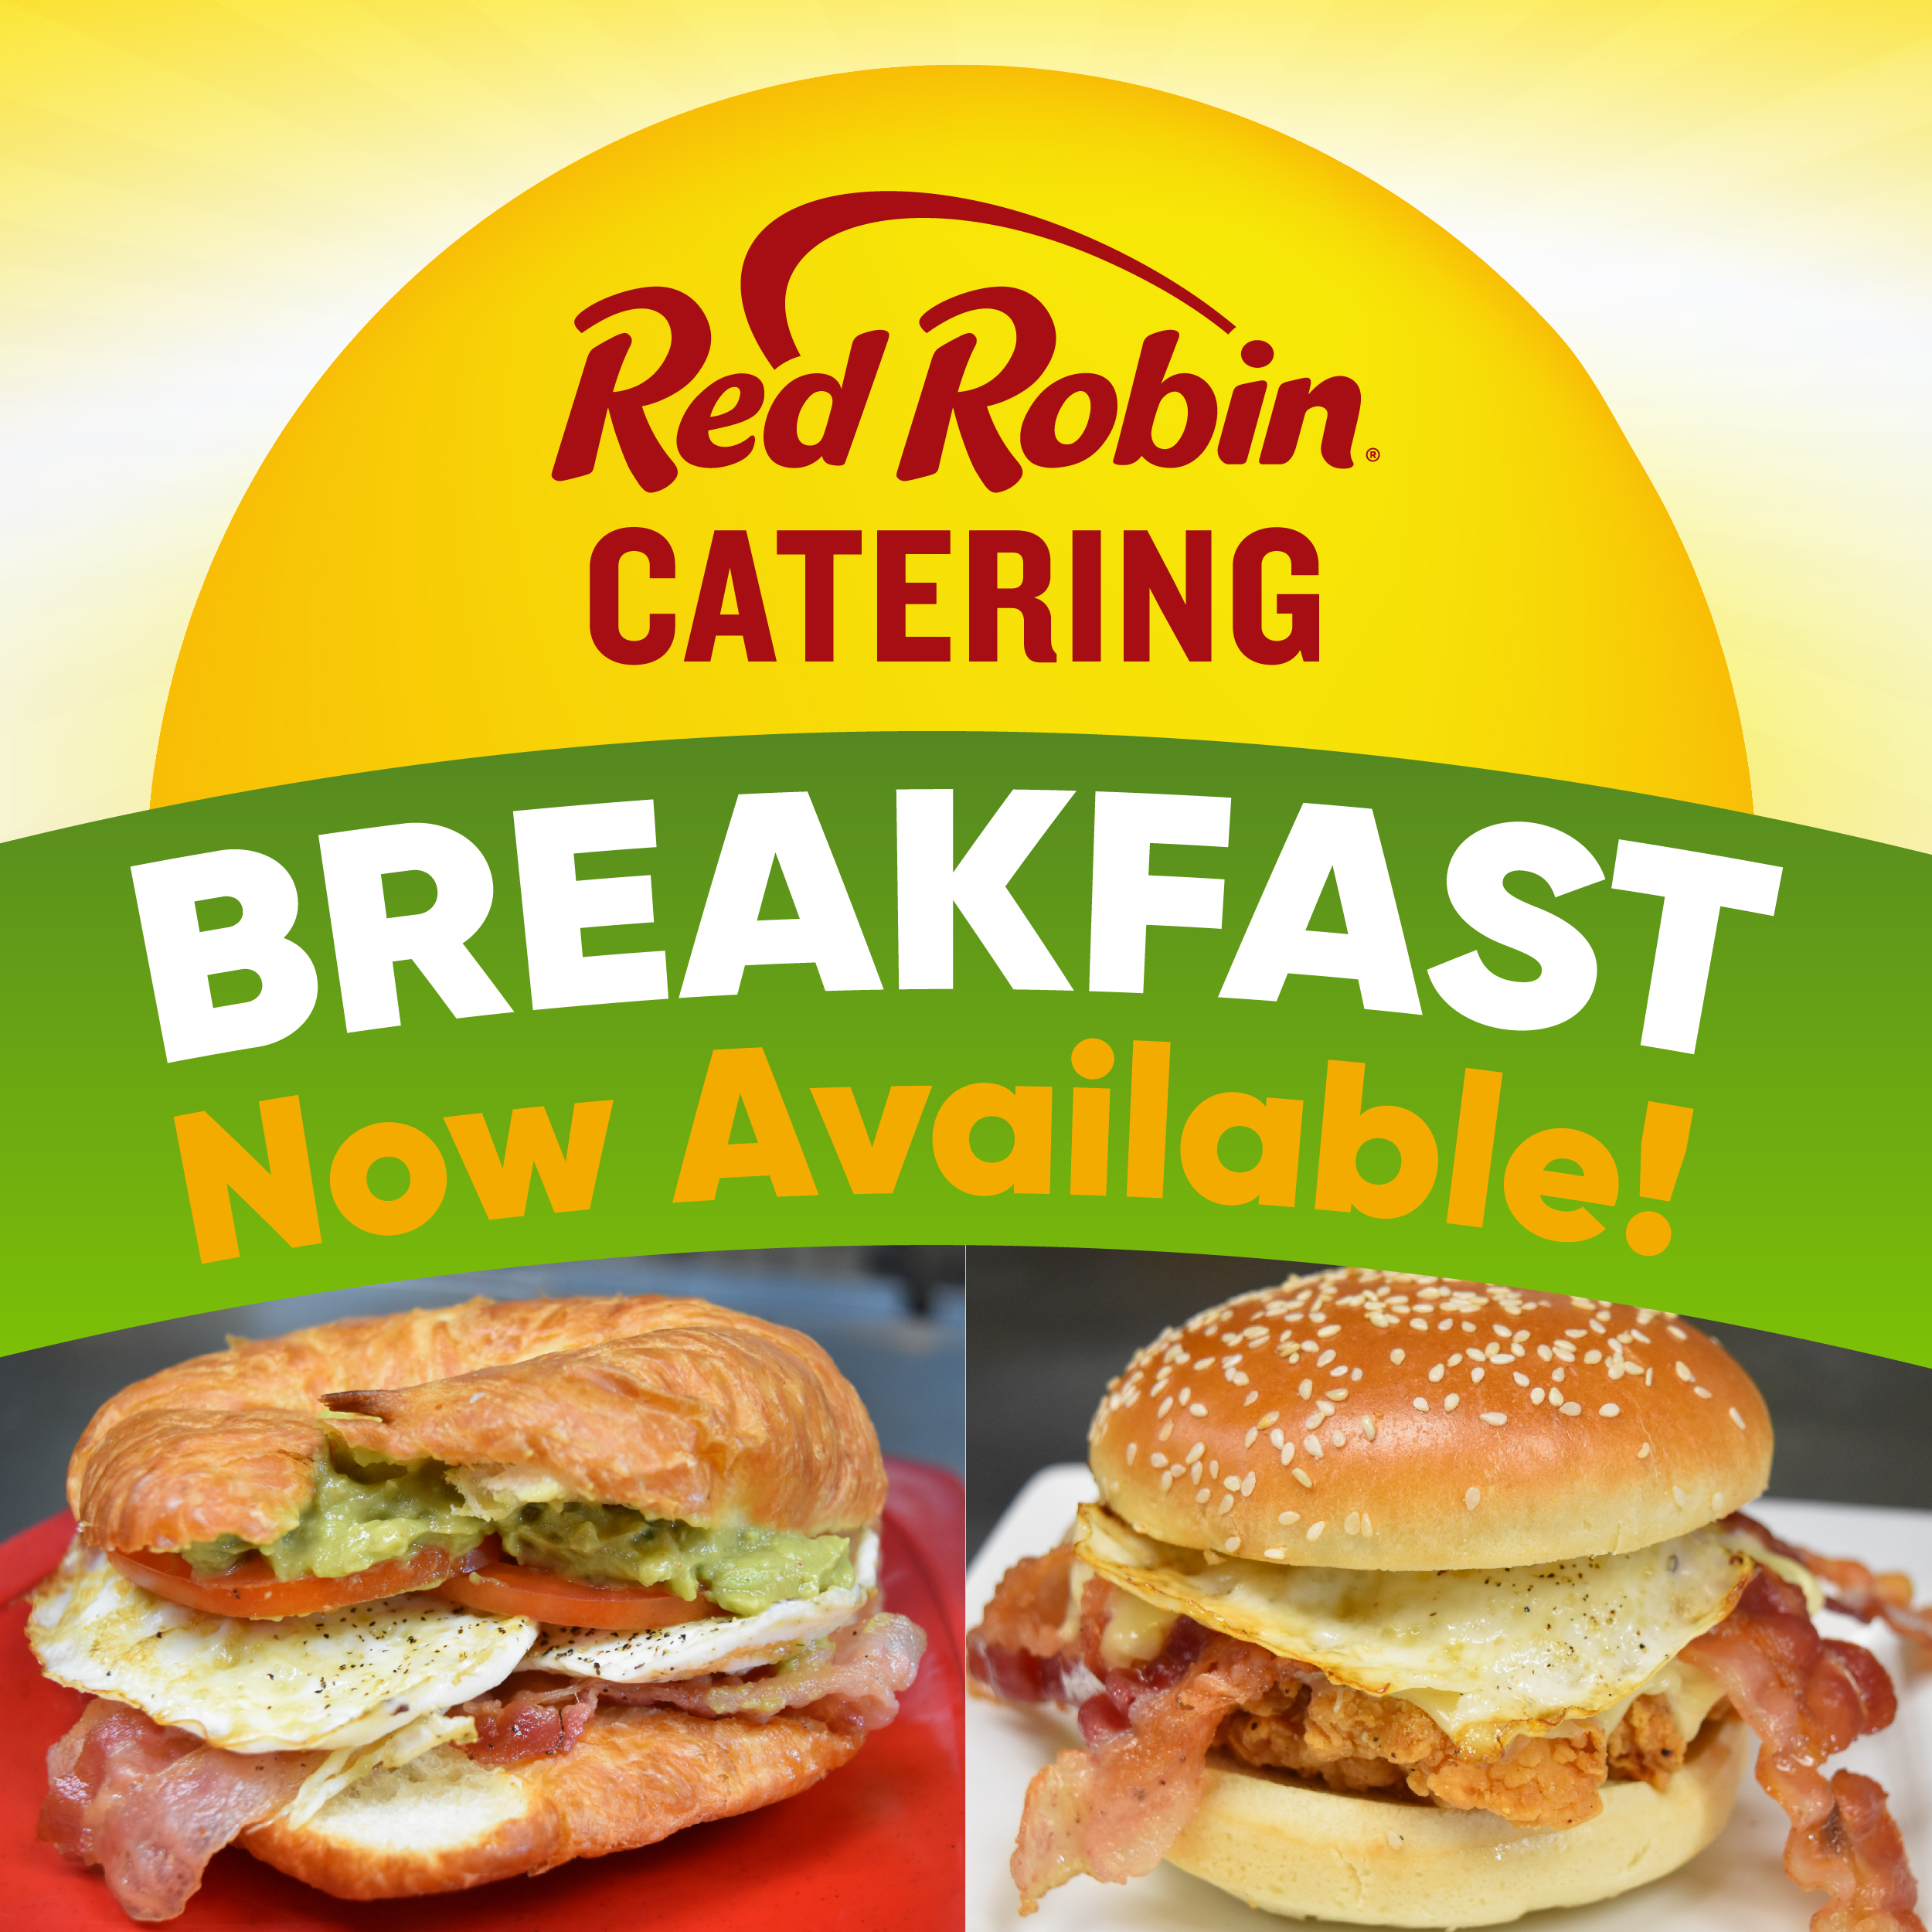 Red Robin Breakfast Catering is now available! Click the image to see the menu.